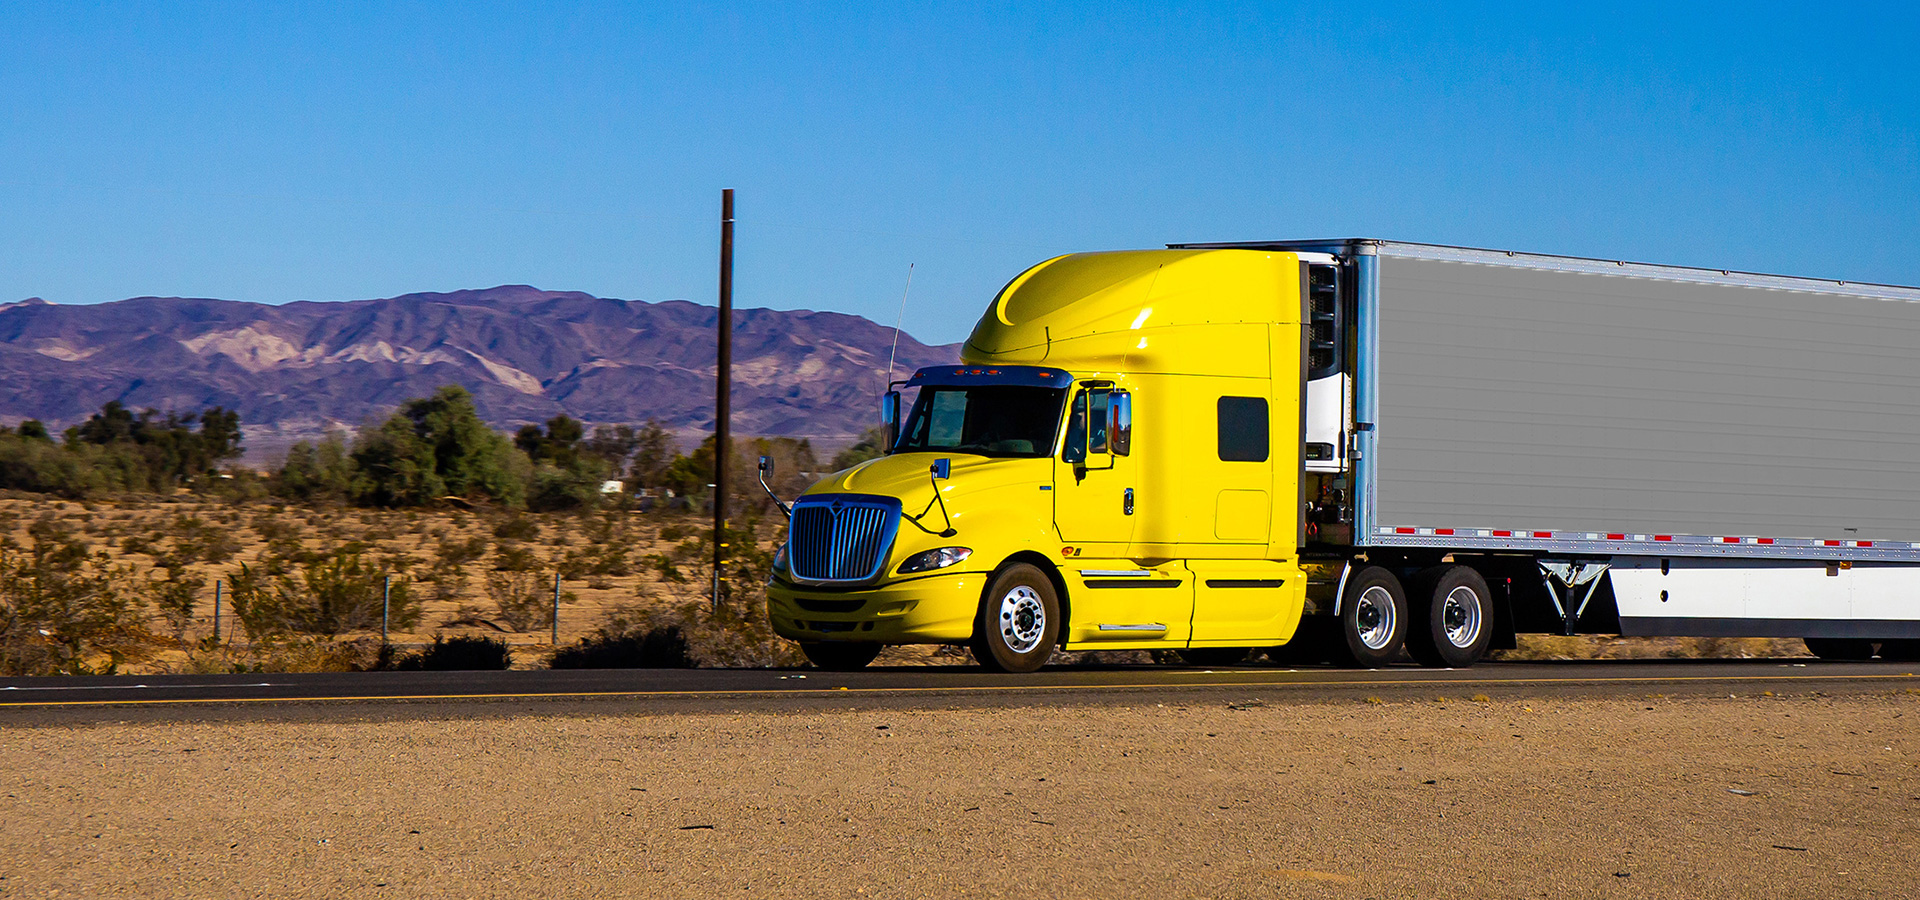 Yellow semi truck driving towards the camera on road in Nevada